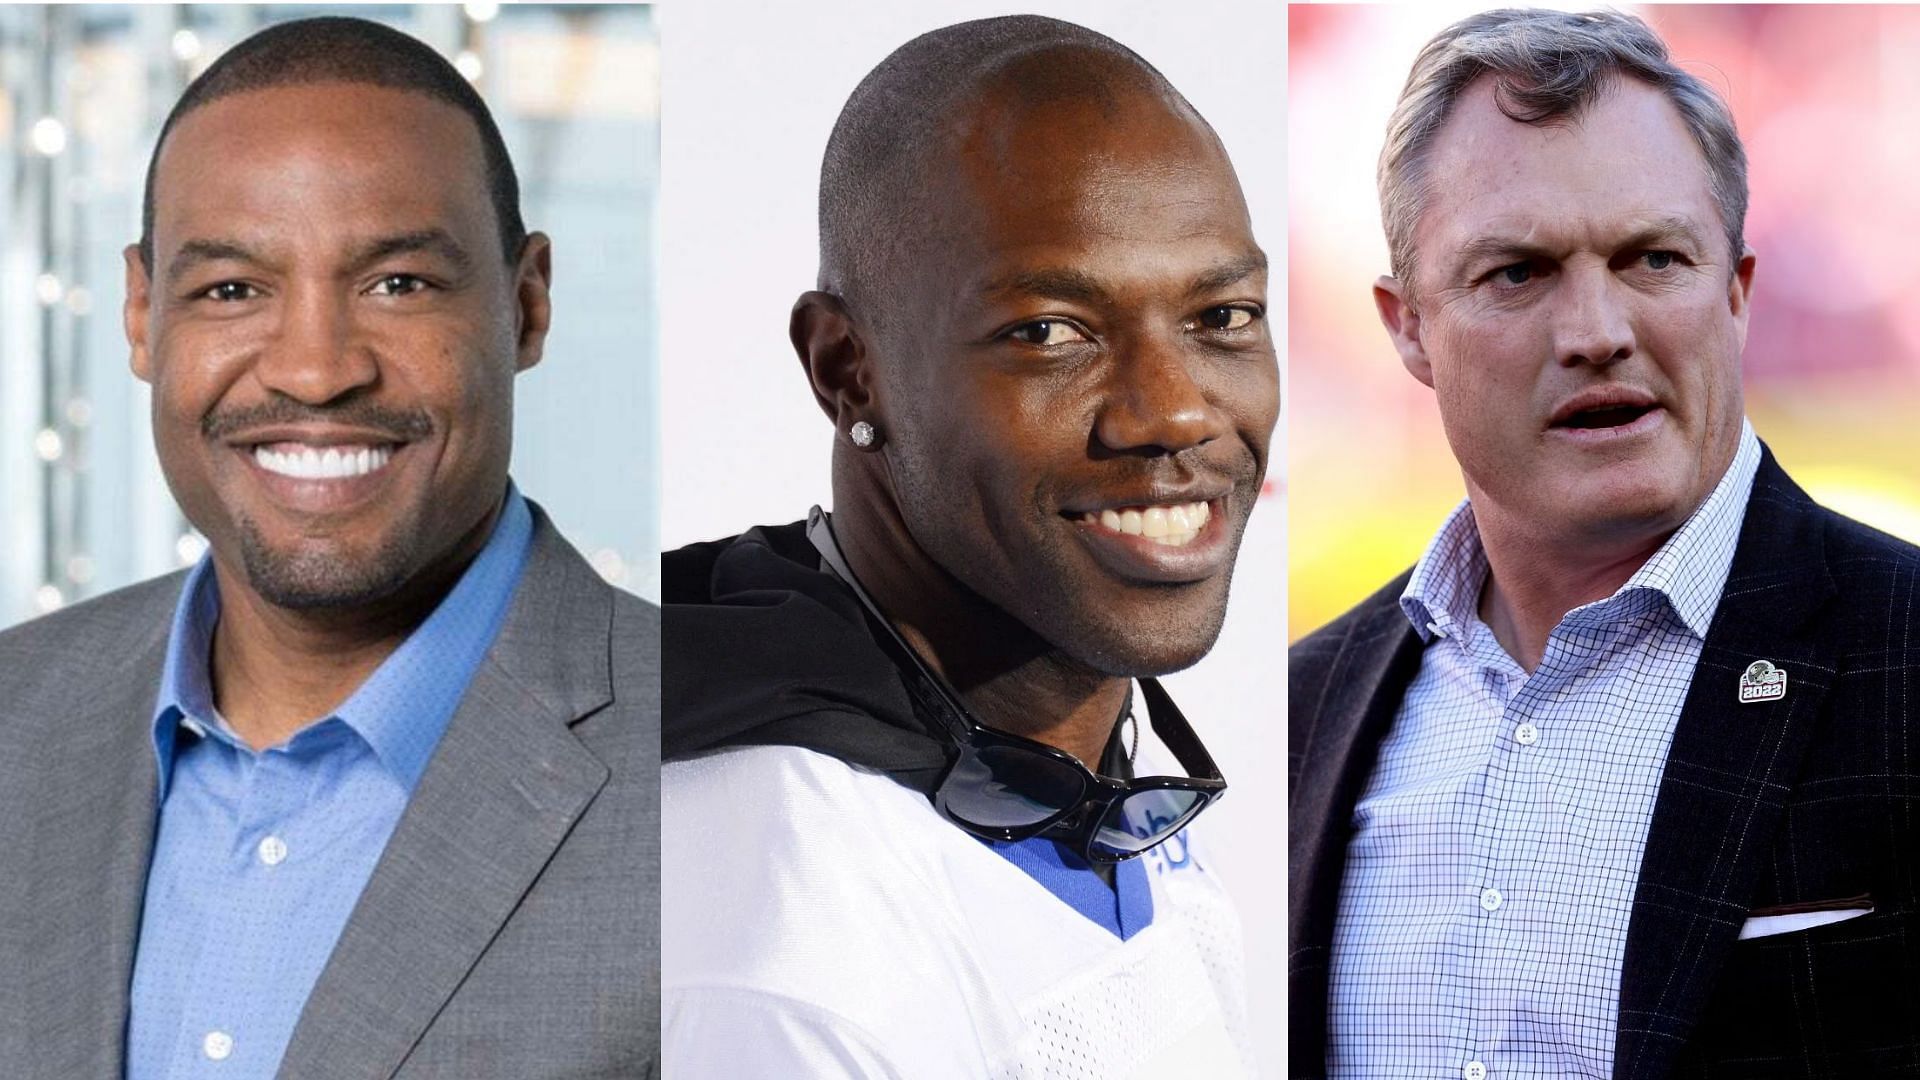 Terrell Owens (center) cannot believe that John Lynch (right) has been enshrined into the Pro Football Hall of Fame while Darren Woodson (left) isn